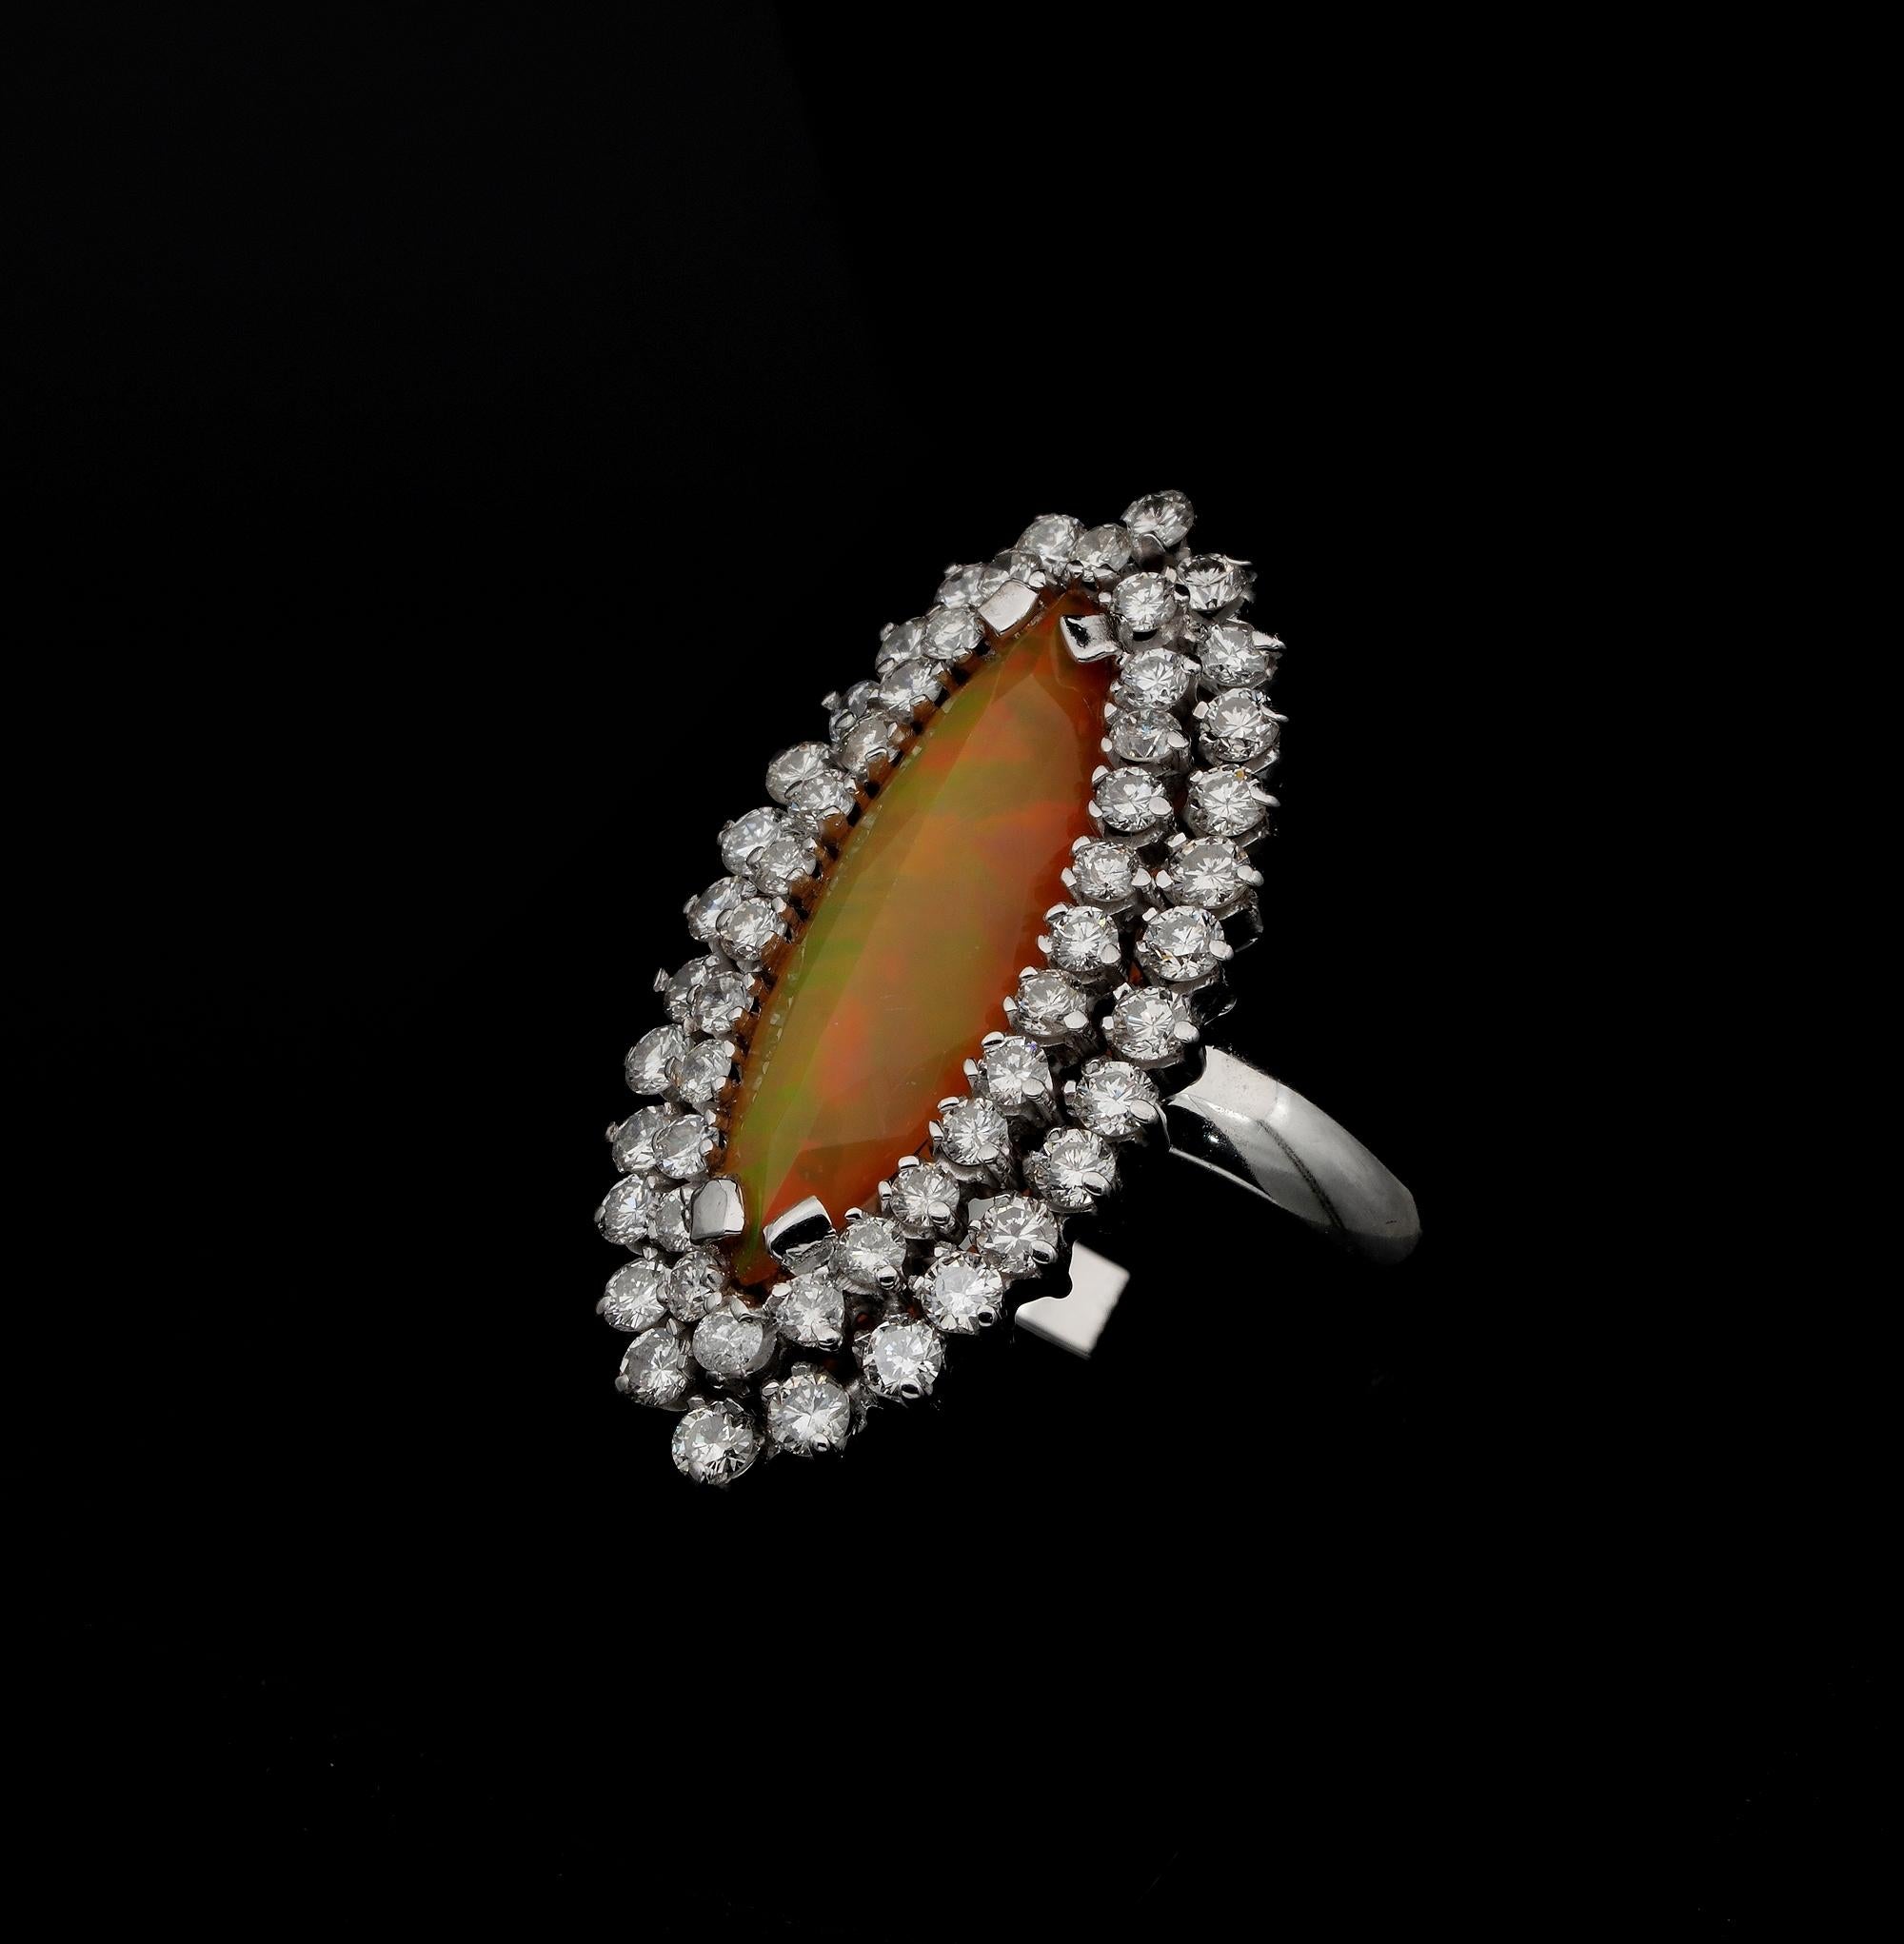 Contemporary Magnificent Vintage Marquee Shaped Rare Fire Opal 2.60 Carat Diamond Ring For Sale